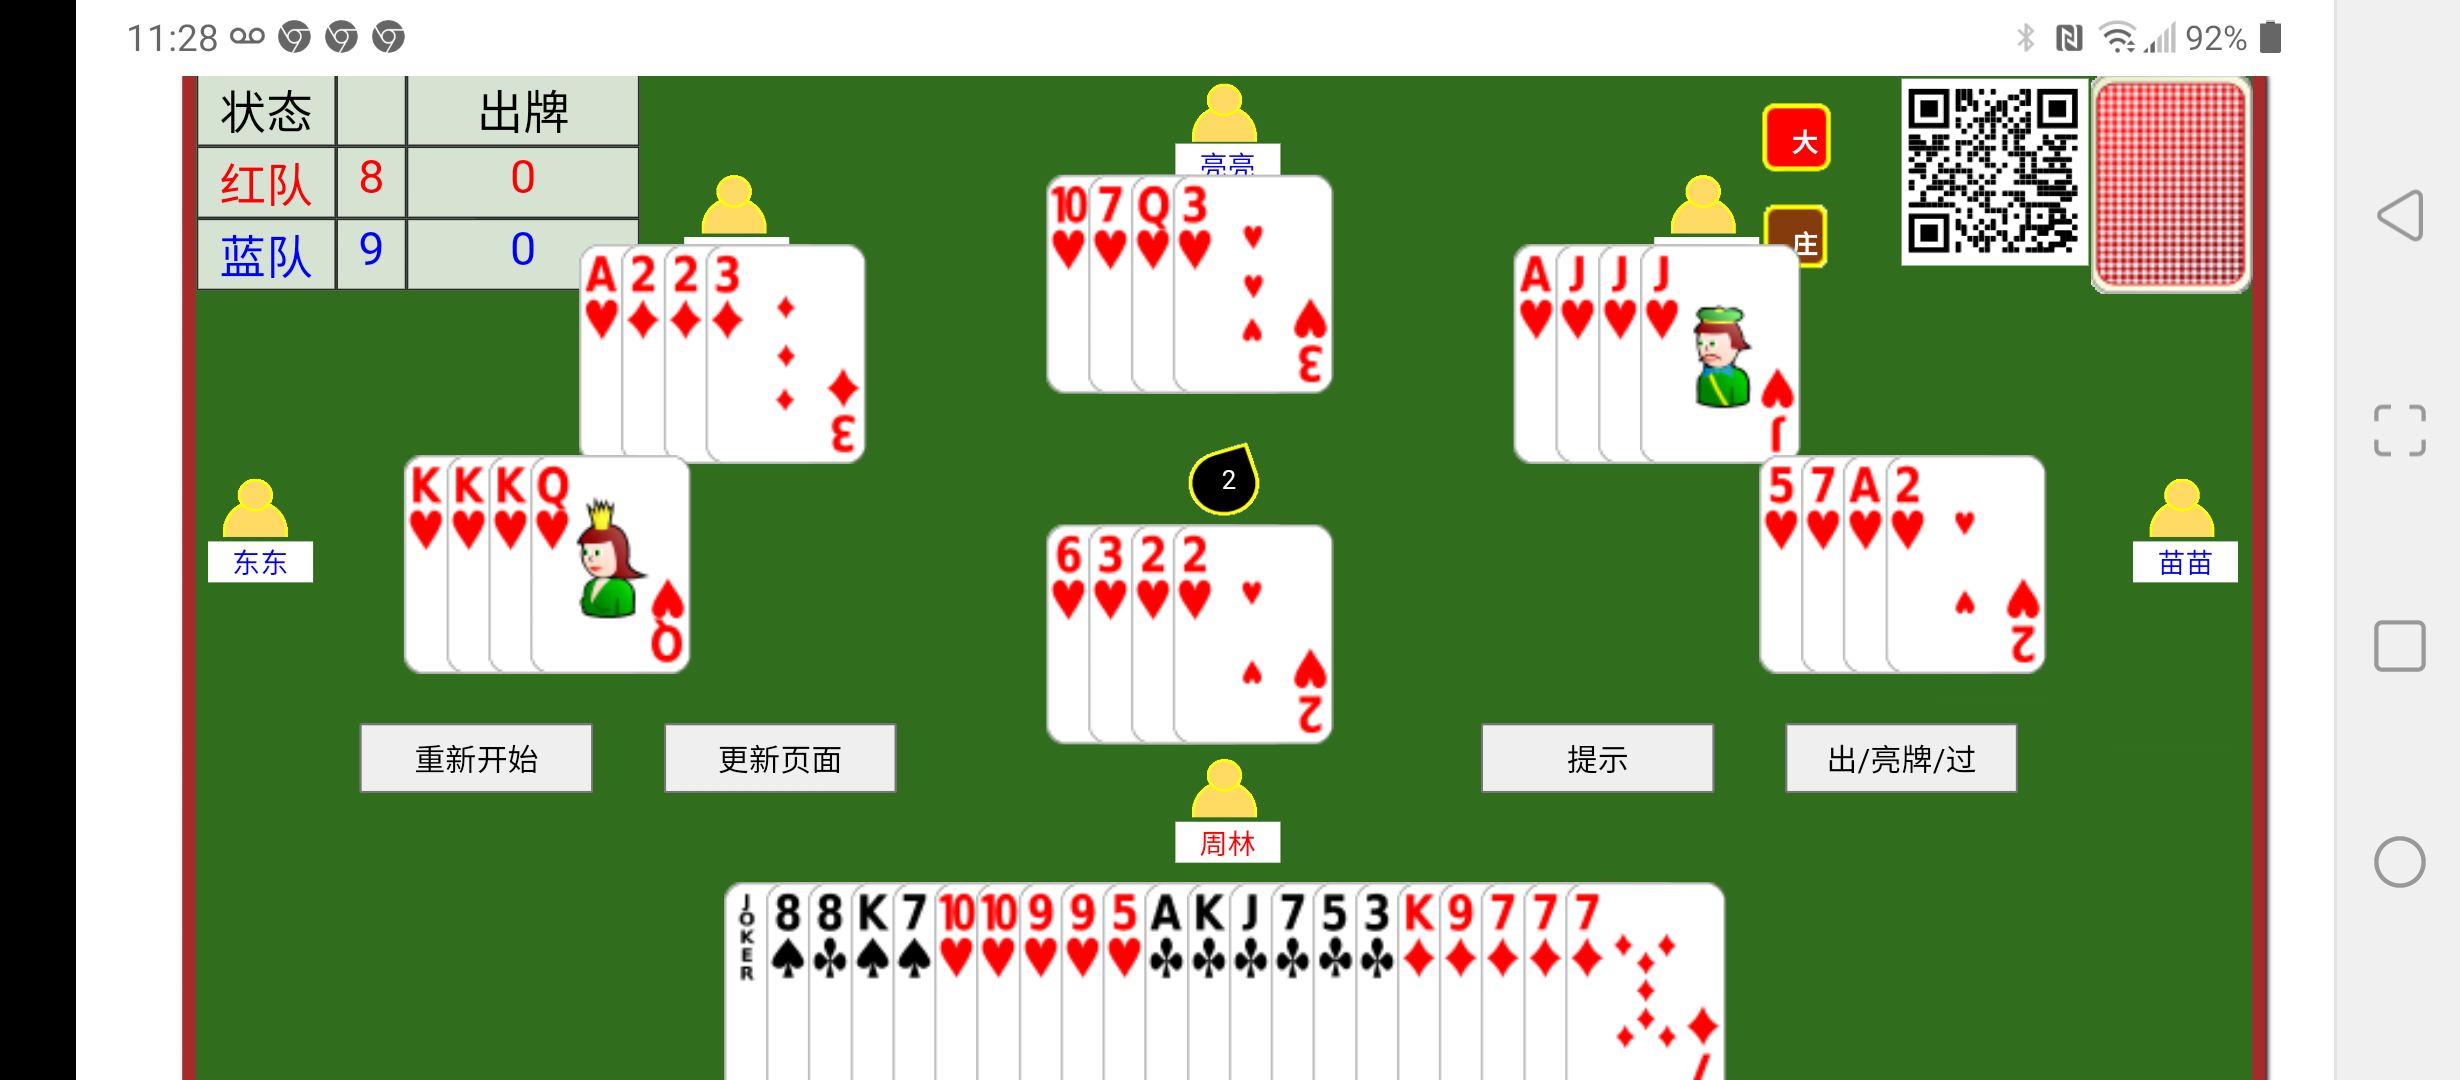 html5 tractor card game Screenshot_20220122-112849.png